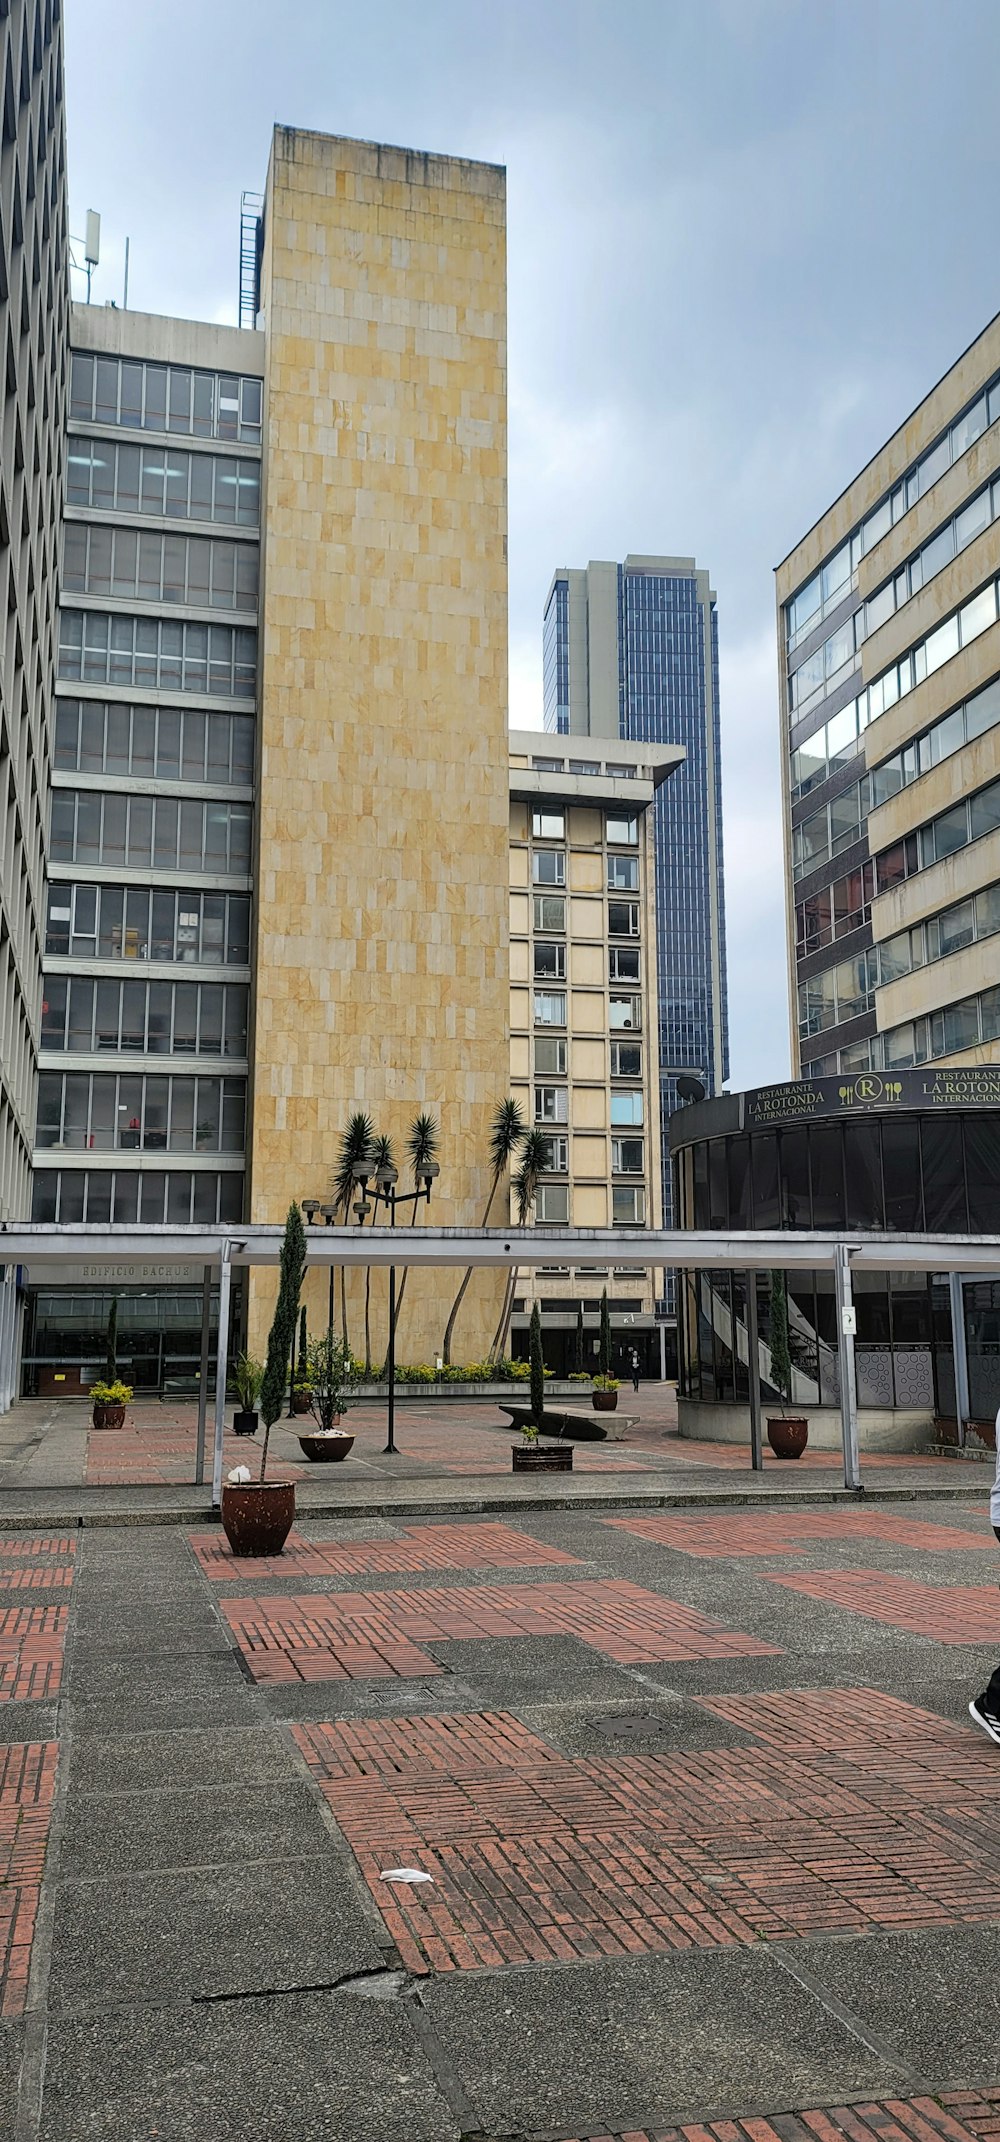 a person walking down a walkway in front of some buildings